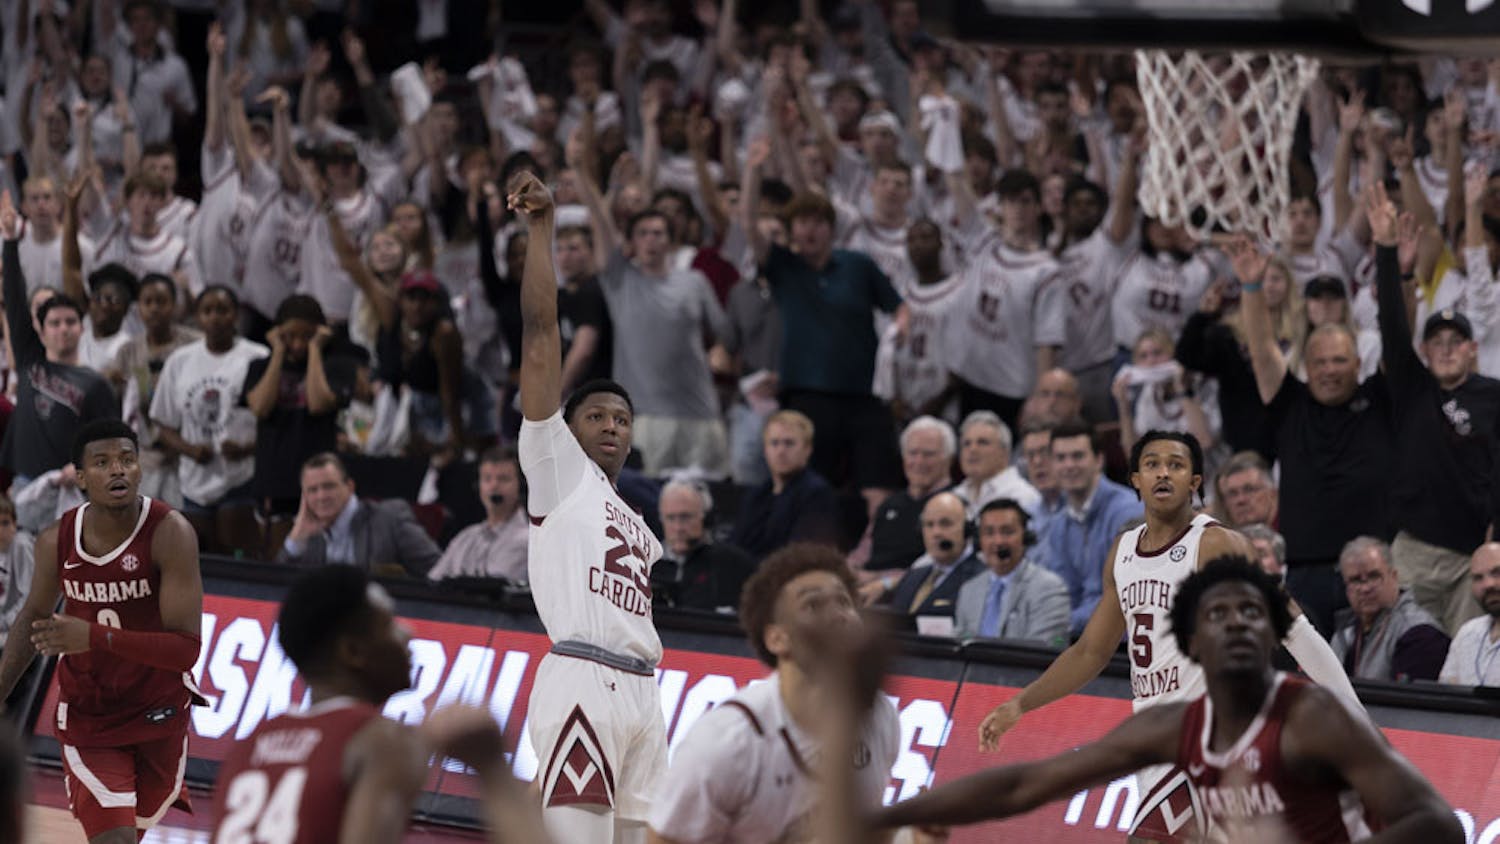 FIle — Freshman forward G.G. Jackson II looks to see if the ball went in on his shot attempt against Alabama. Jackson scored 19 points in the Gamecocks' loss against the Crimson Tide 78-76 in overtime on Feb. 22, 2023.